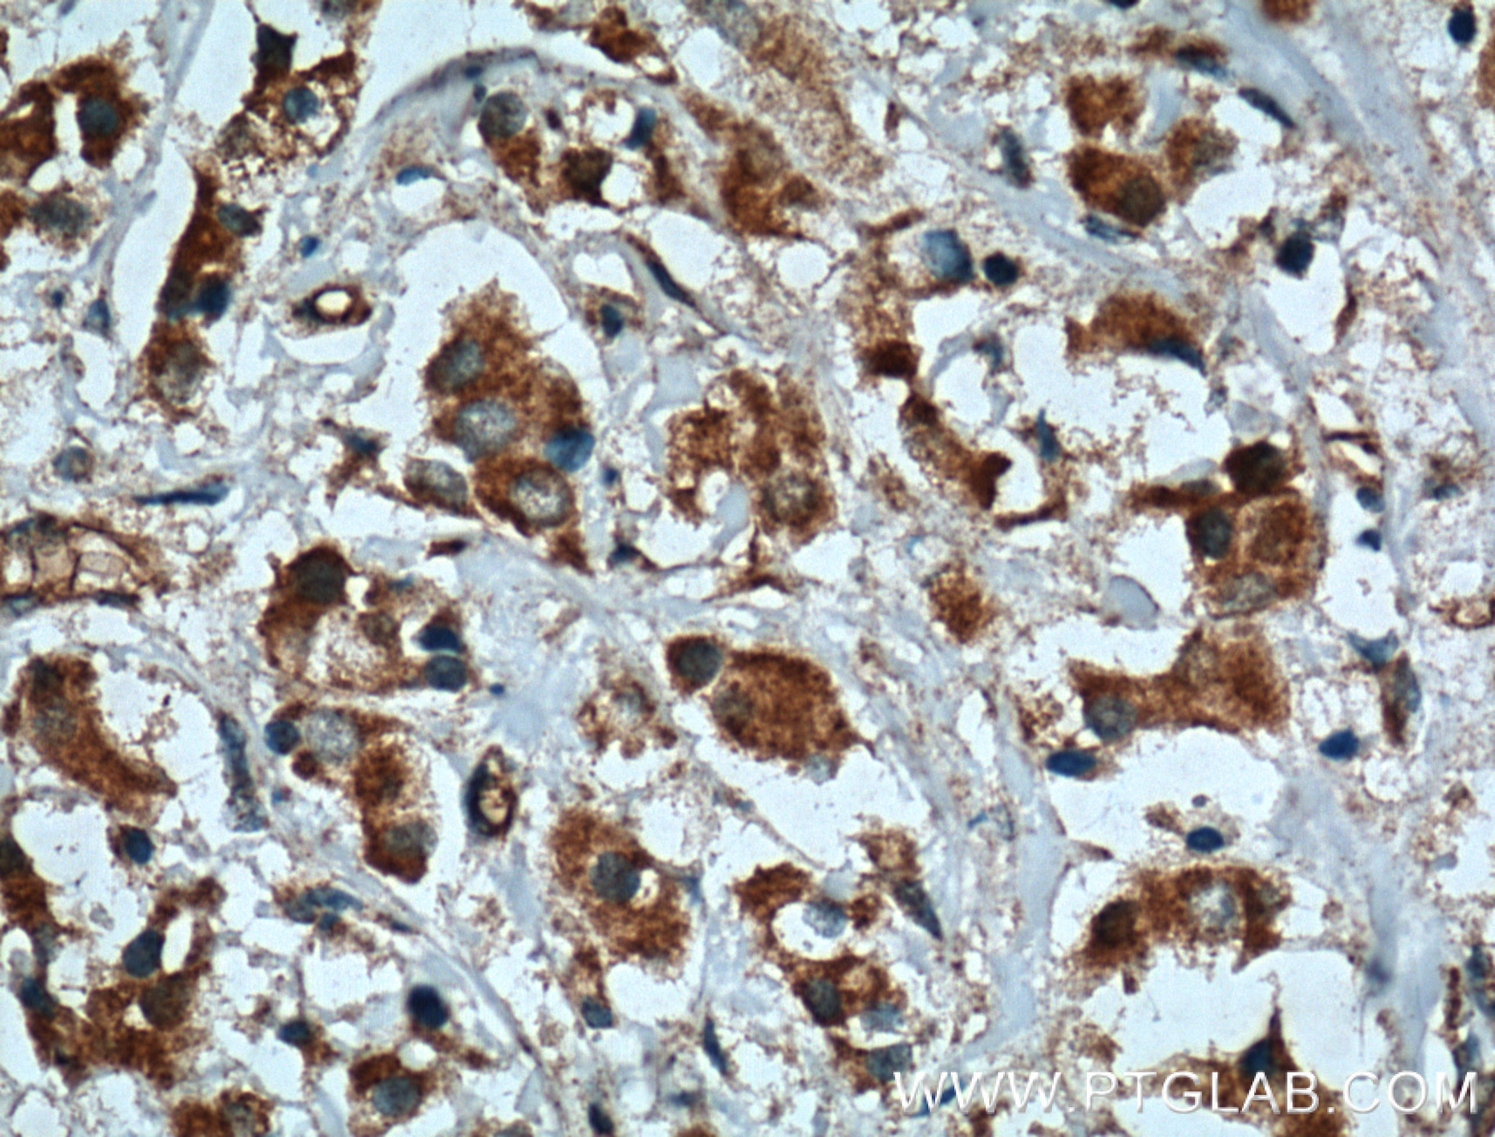 Immunohistochemistry (IHC) staining of human breast cancer tissue using XBP1S-specific Polyclonal antibody (24868-1-AP)